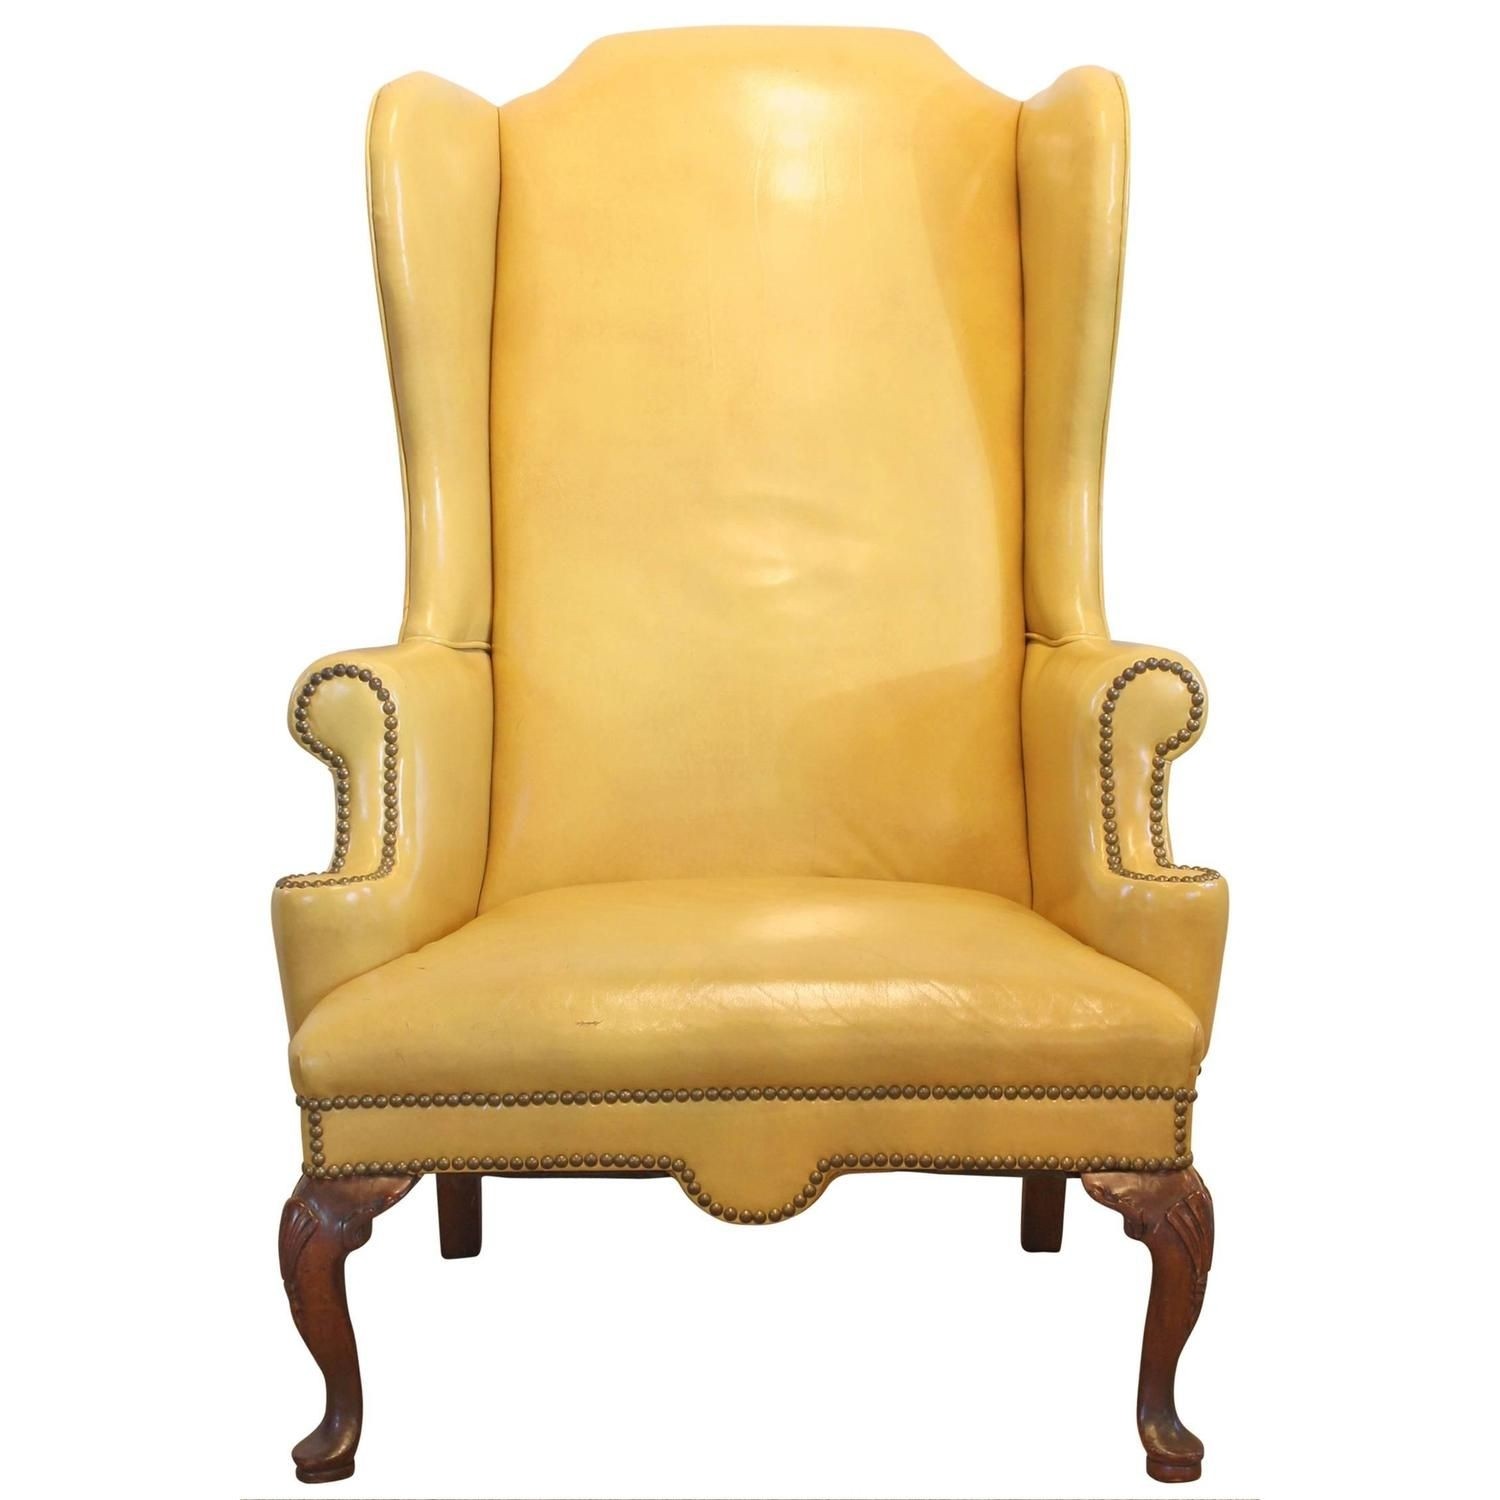 Mustard yellow leather wing chair wingback chair sofa